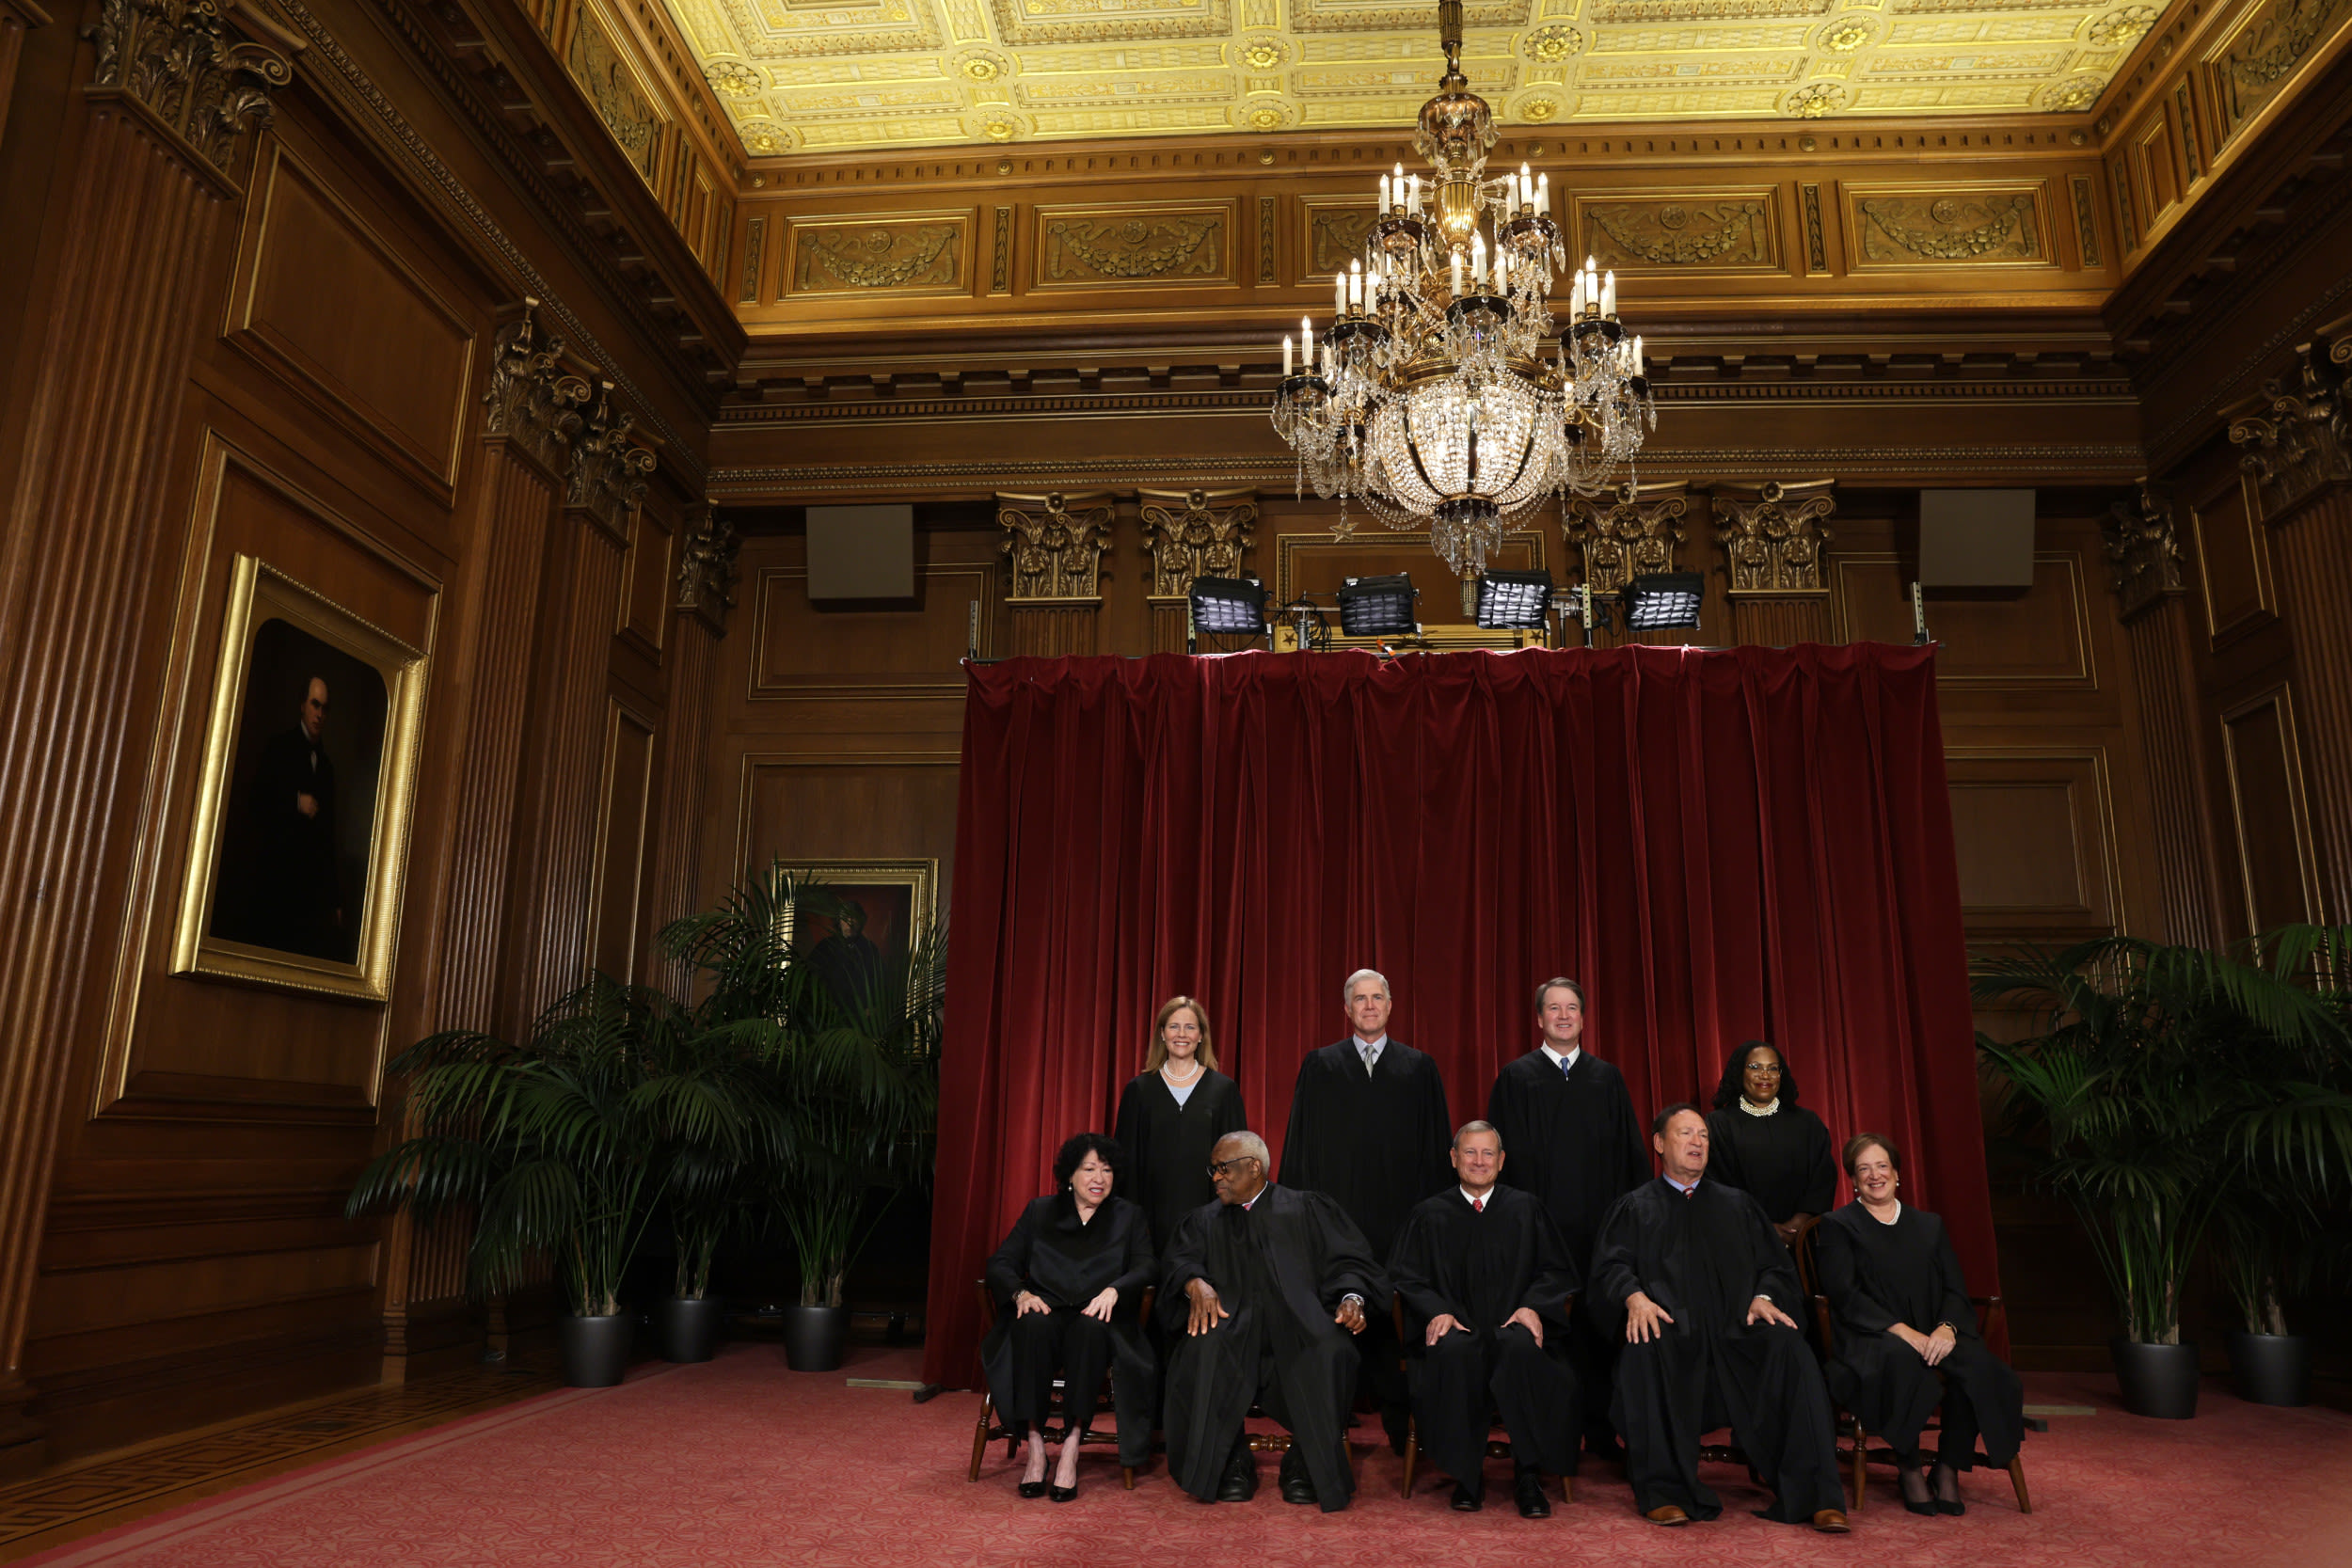 Supreme Court justices refuse to reconsider their decisions